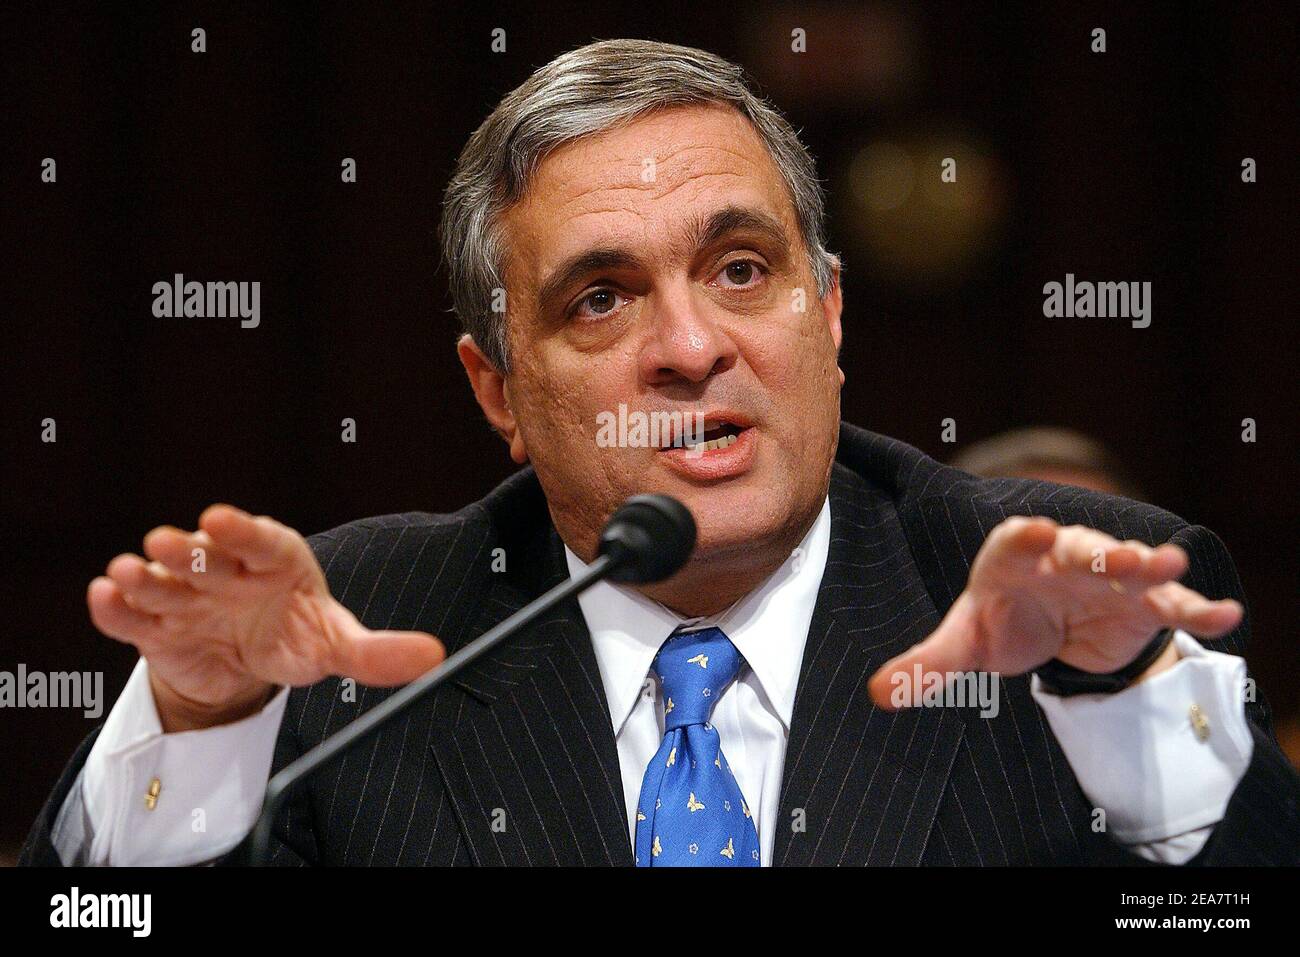 © Olivier Douliery/ABACA. 57636-9. Washington-DC-USA, March 24, 2004. Director of the CIA George tenet, testifies before the 9-11 commission on the formulation and conduct of U.S counter terrorism policy, March 24, 2004, in Washington DC. Stock Photo